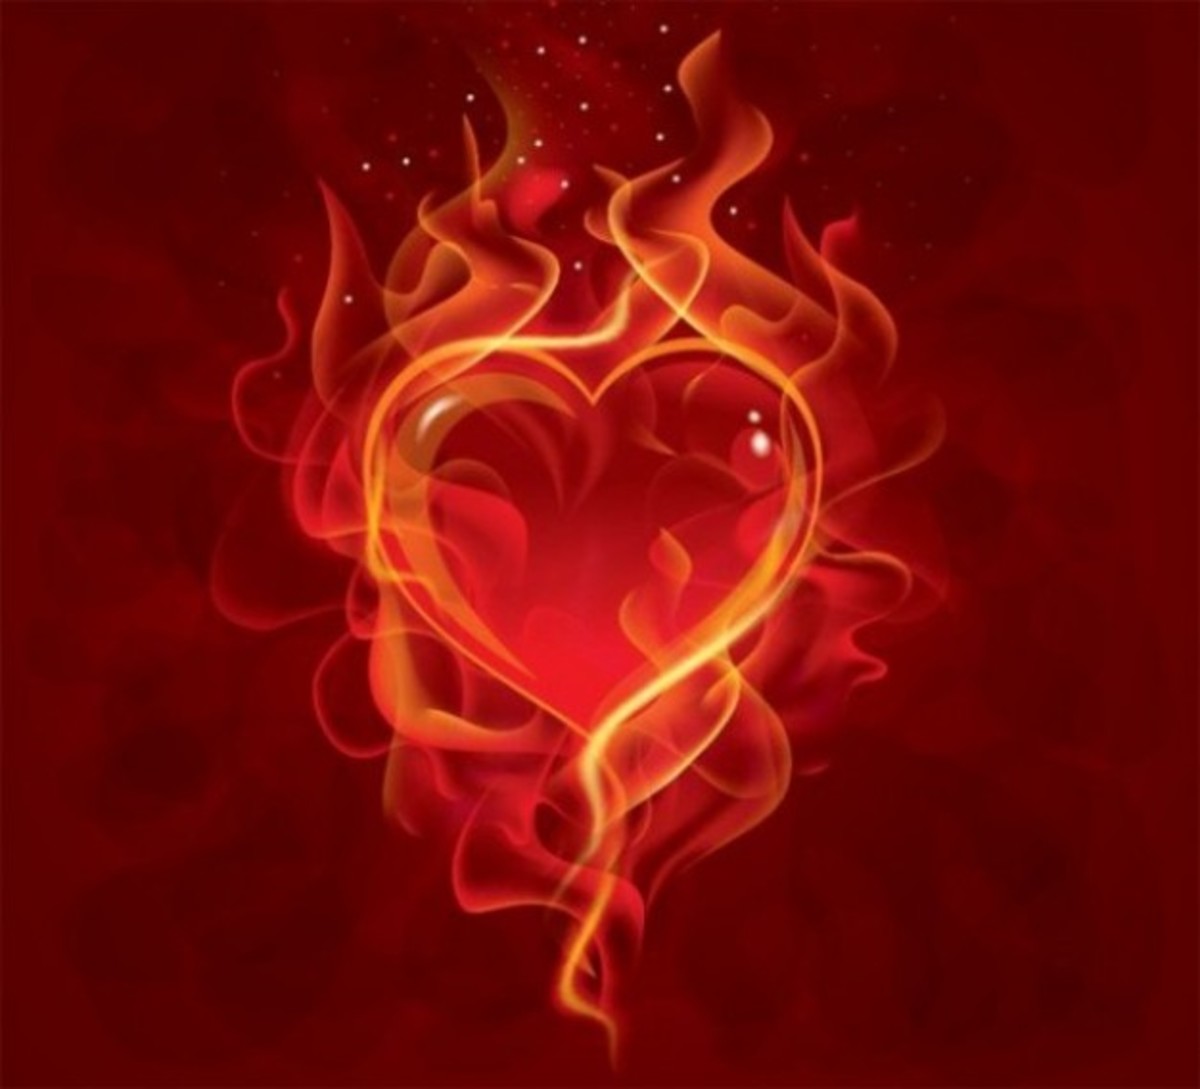 Red Hot Heart Image